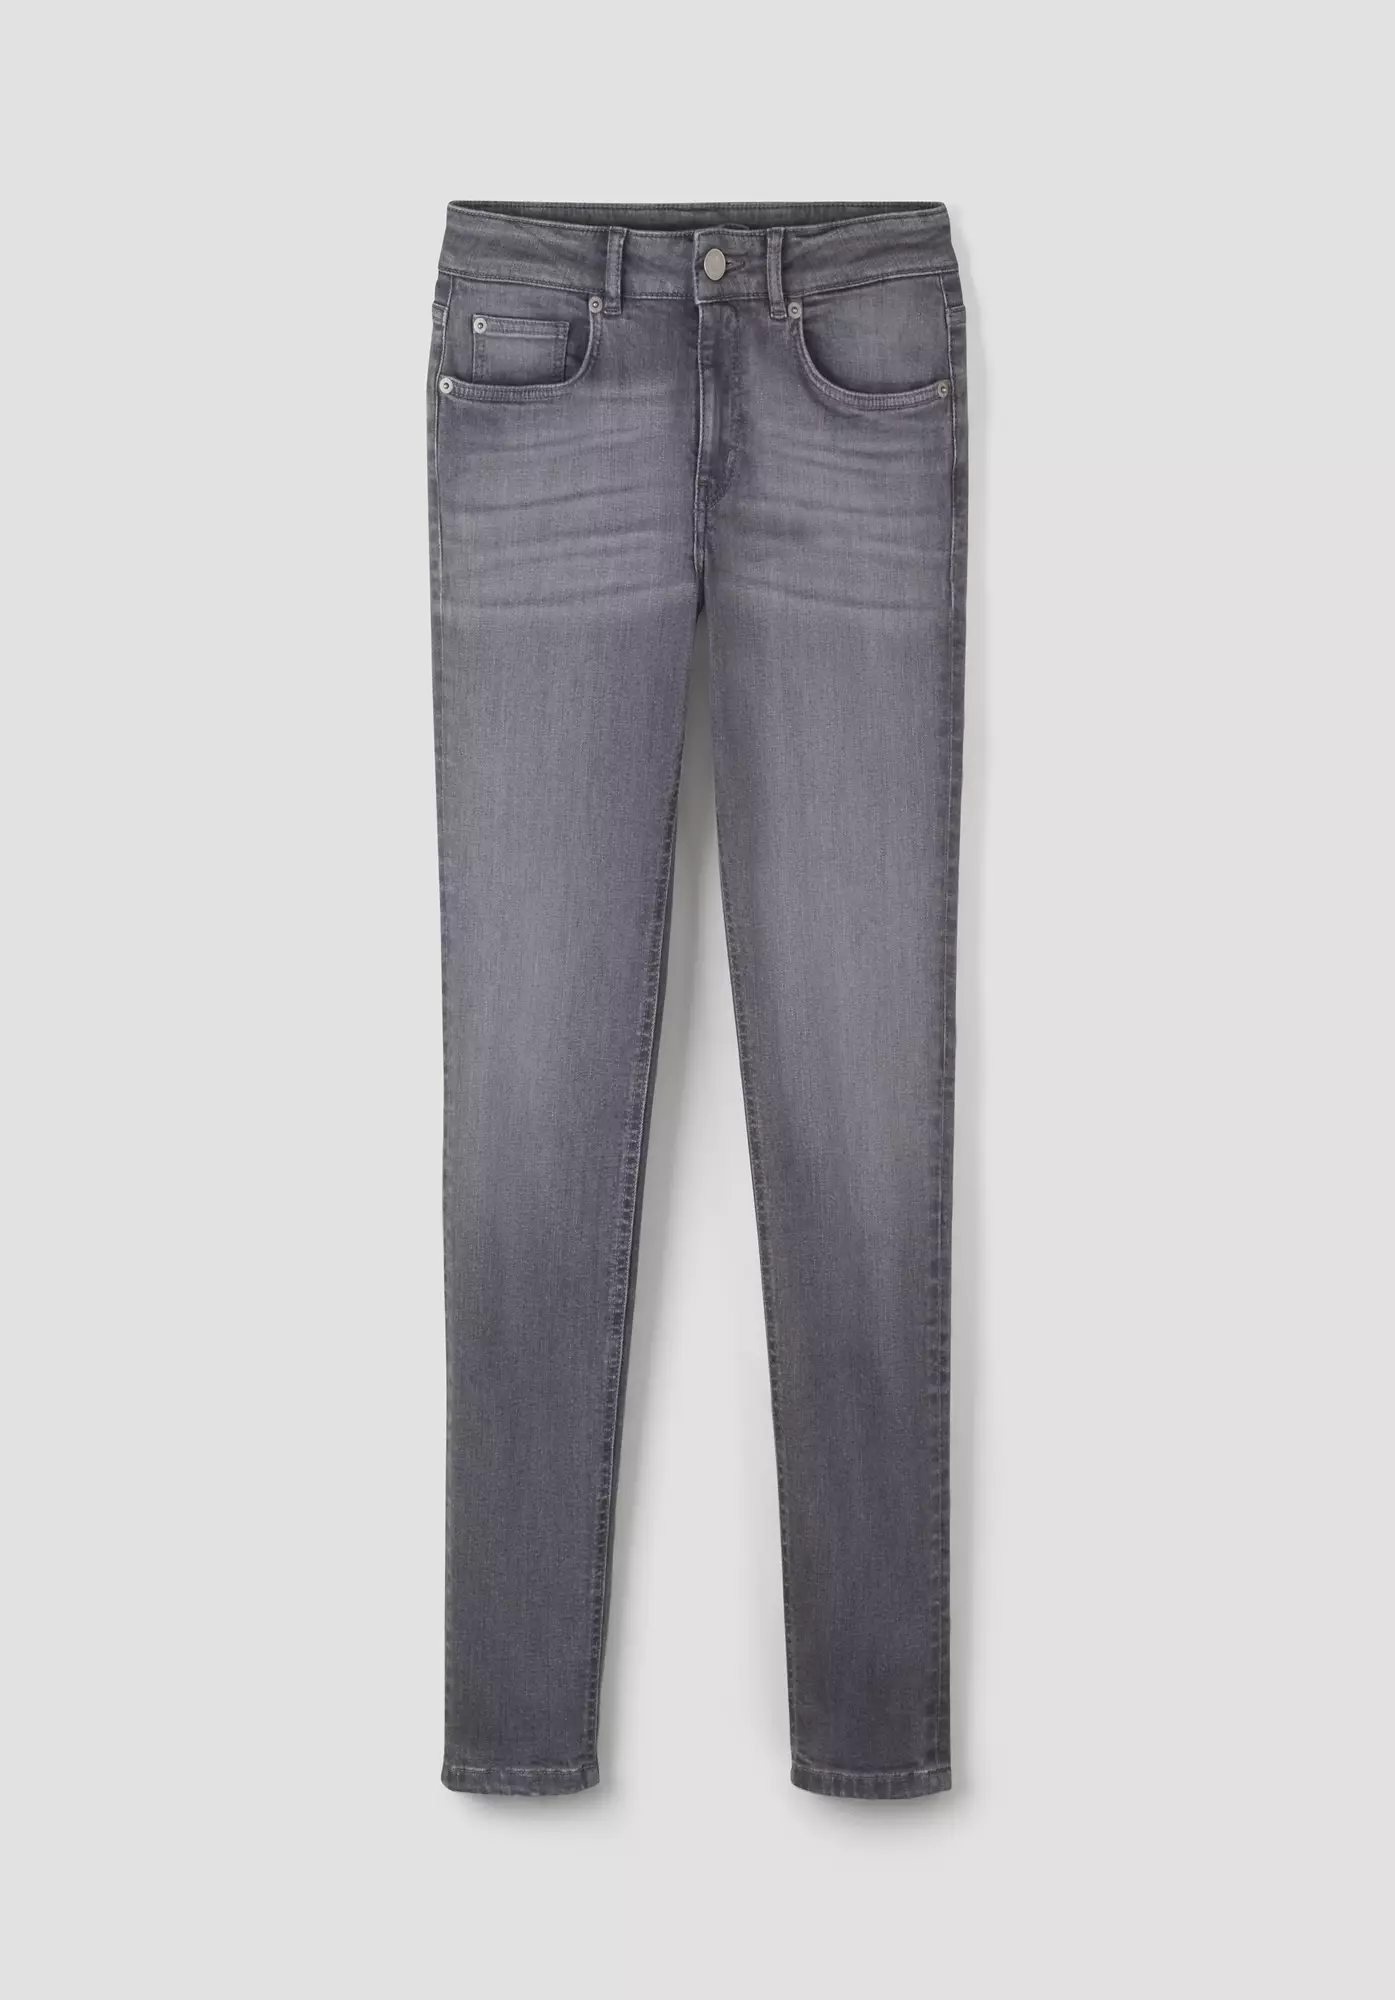 LINA Mid Rise Skinny jeans made from organic denim - 4